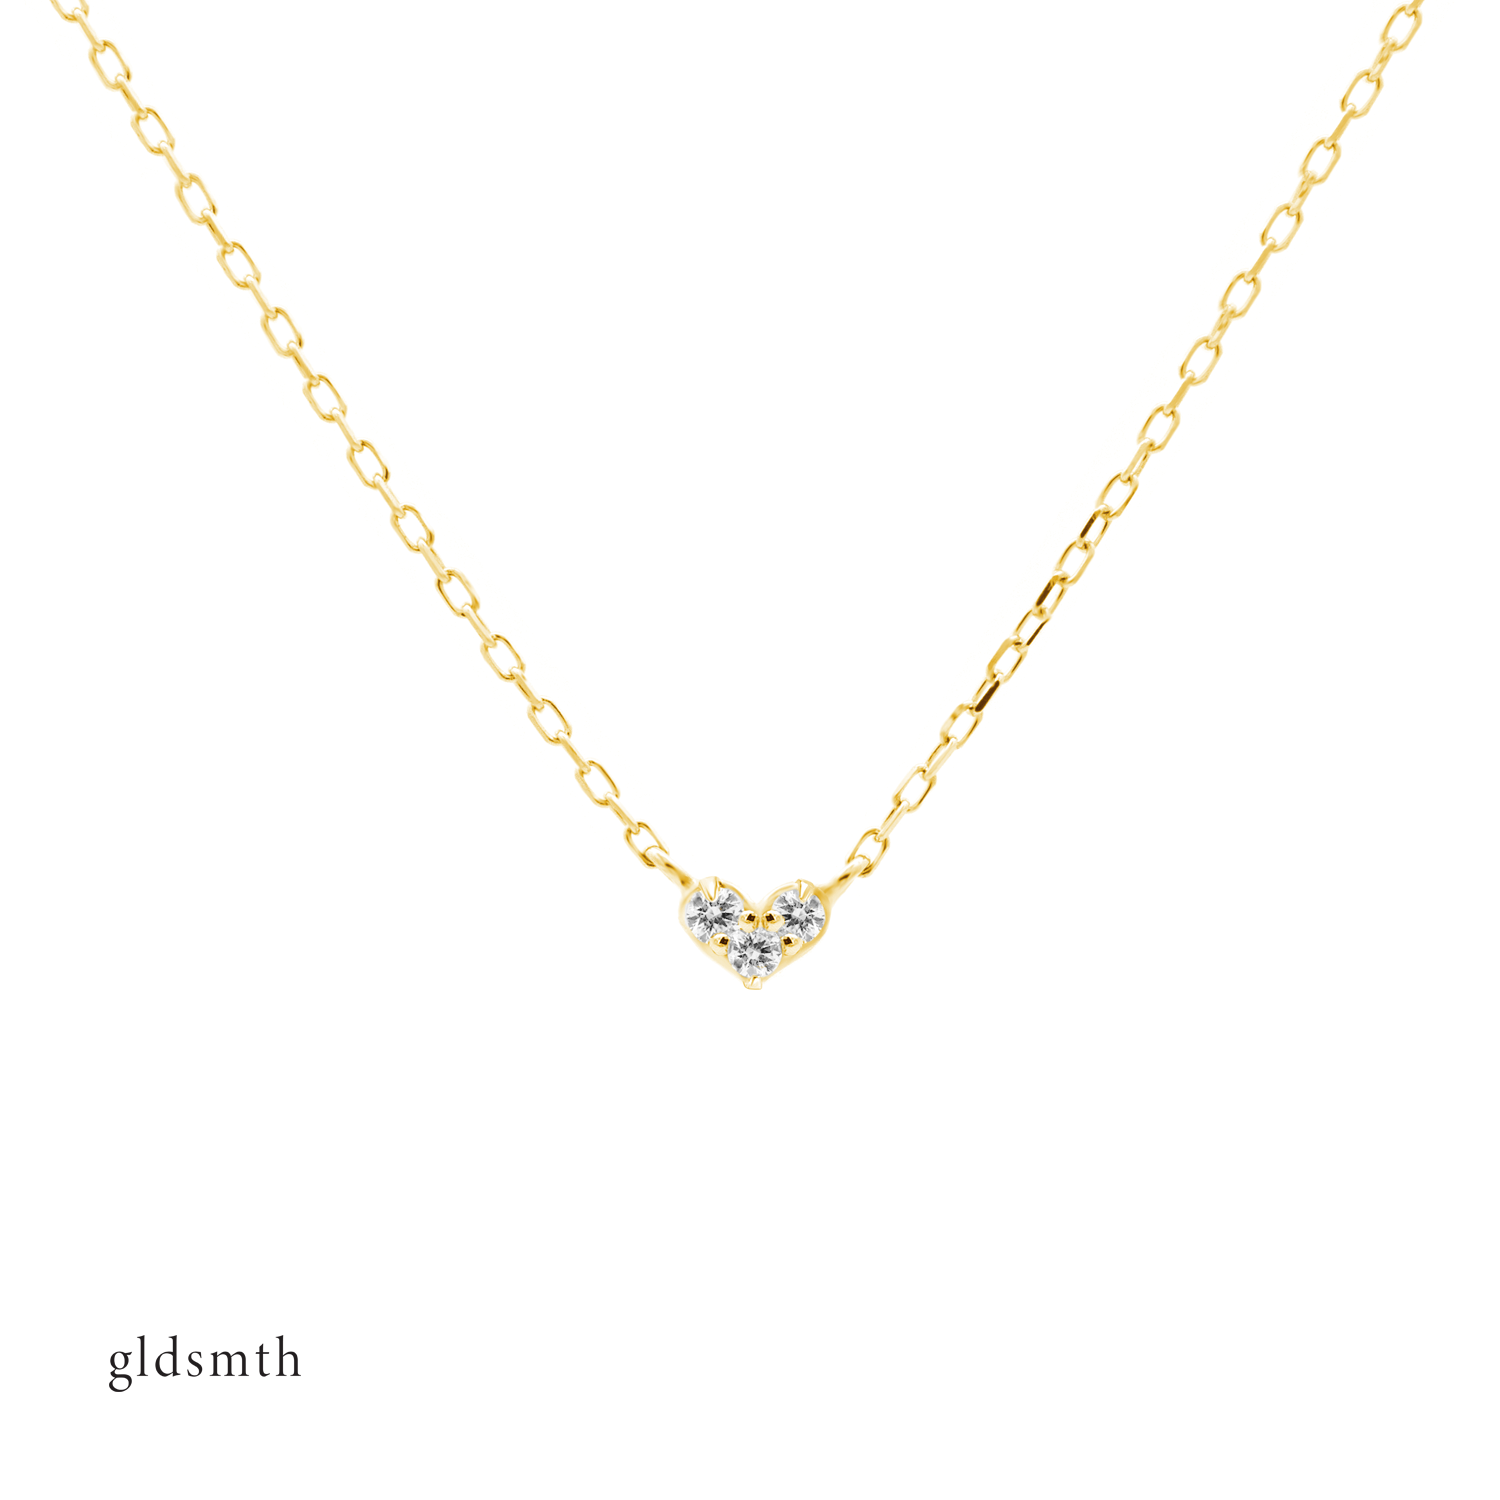 Stunning and fine handcrafted 10k solid yellow gold necklace with conflict-free diamonds.